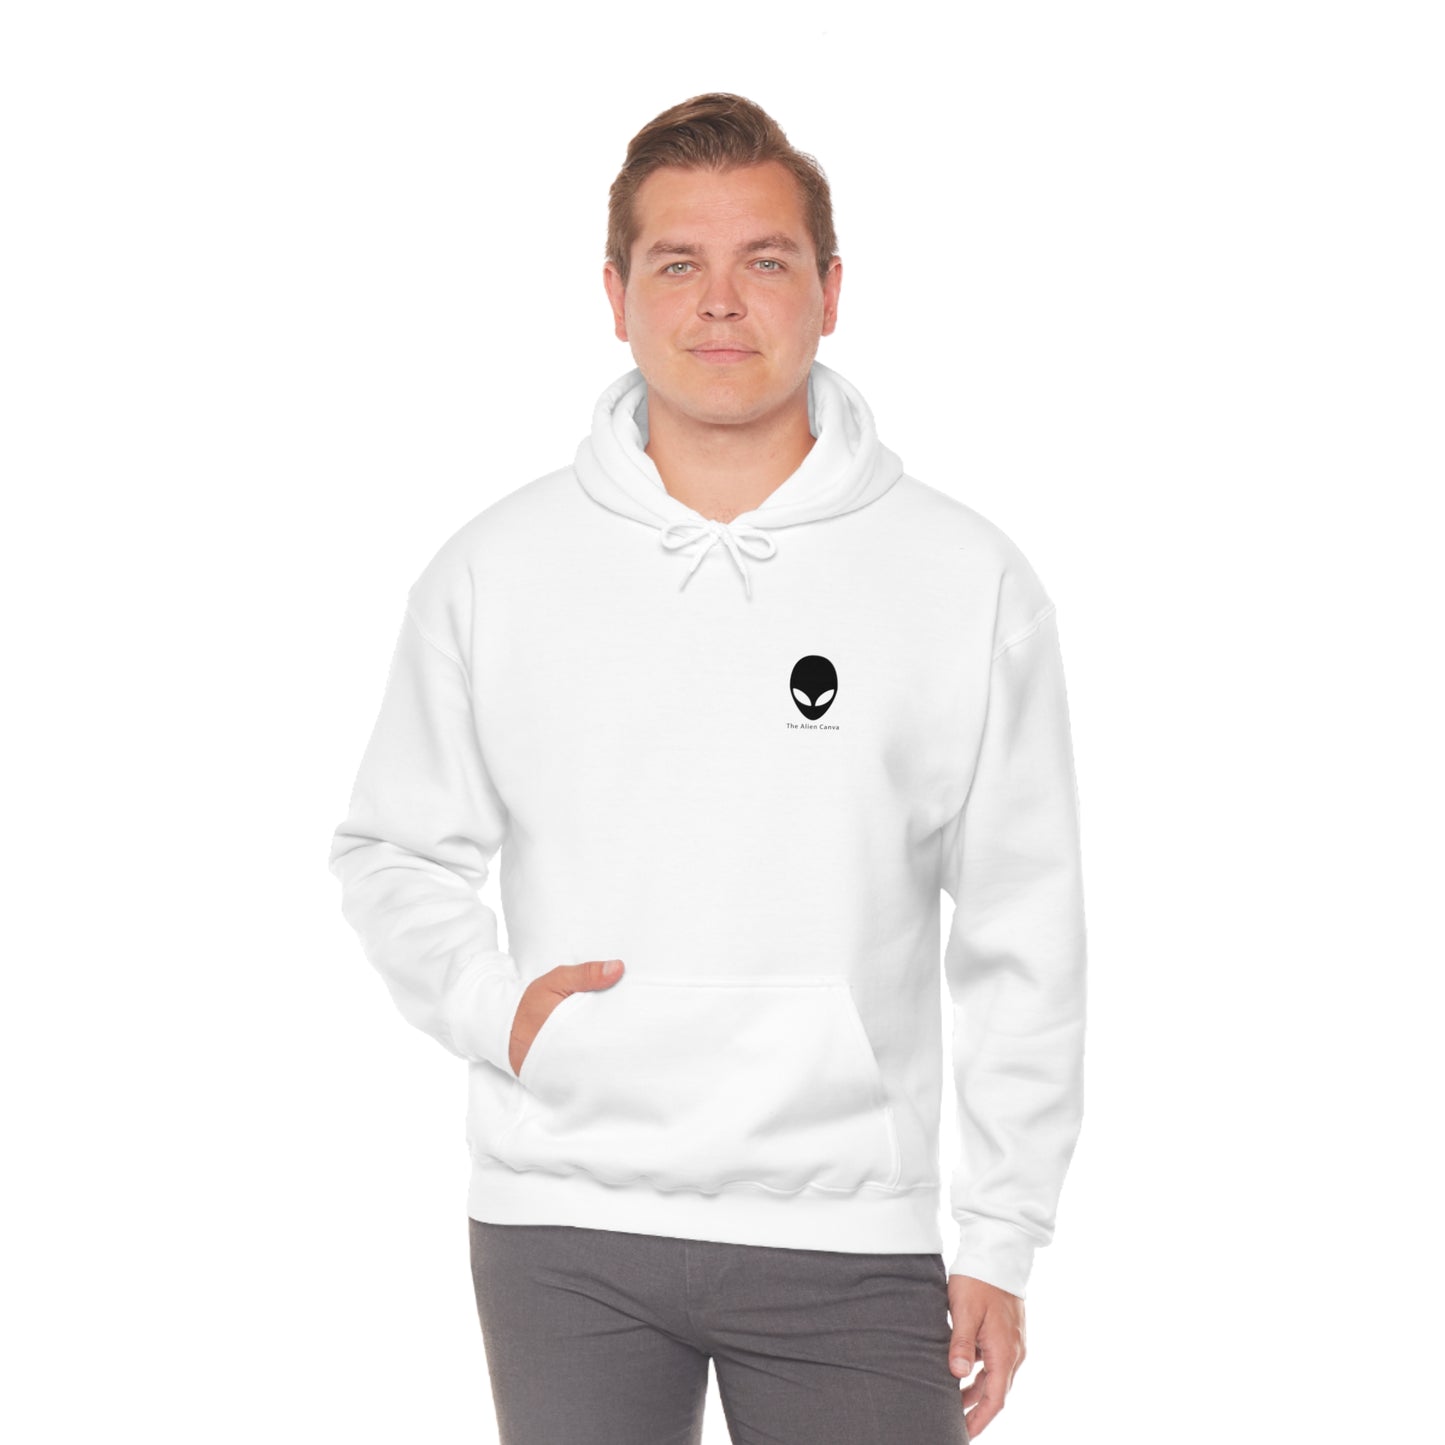 "A Breezy Skyscape: A Combination of Tradition and Modernity" - The Alien Unisex Hoodie